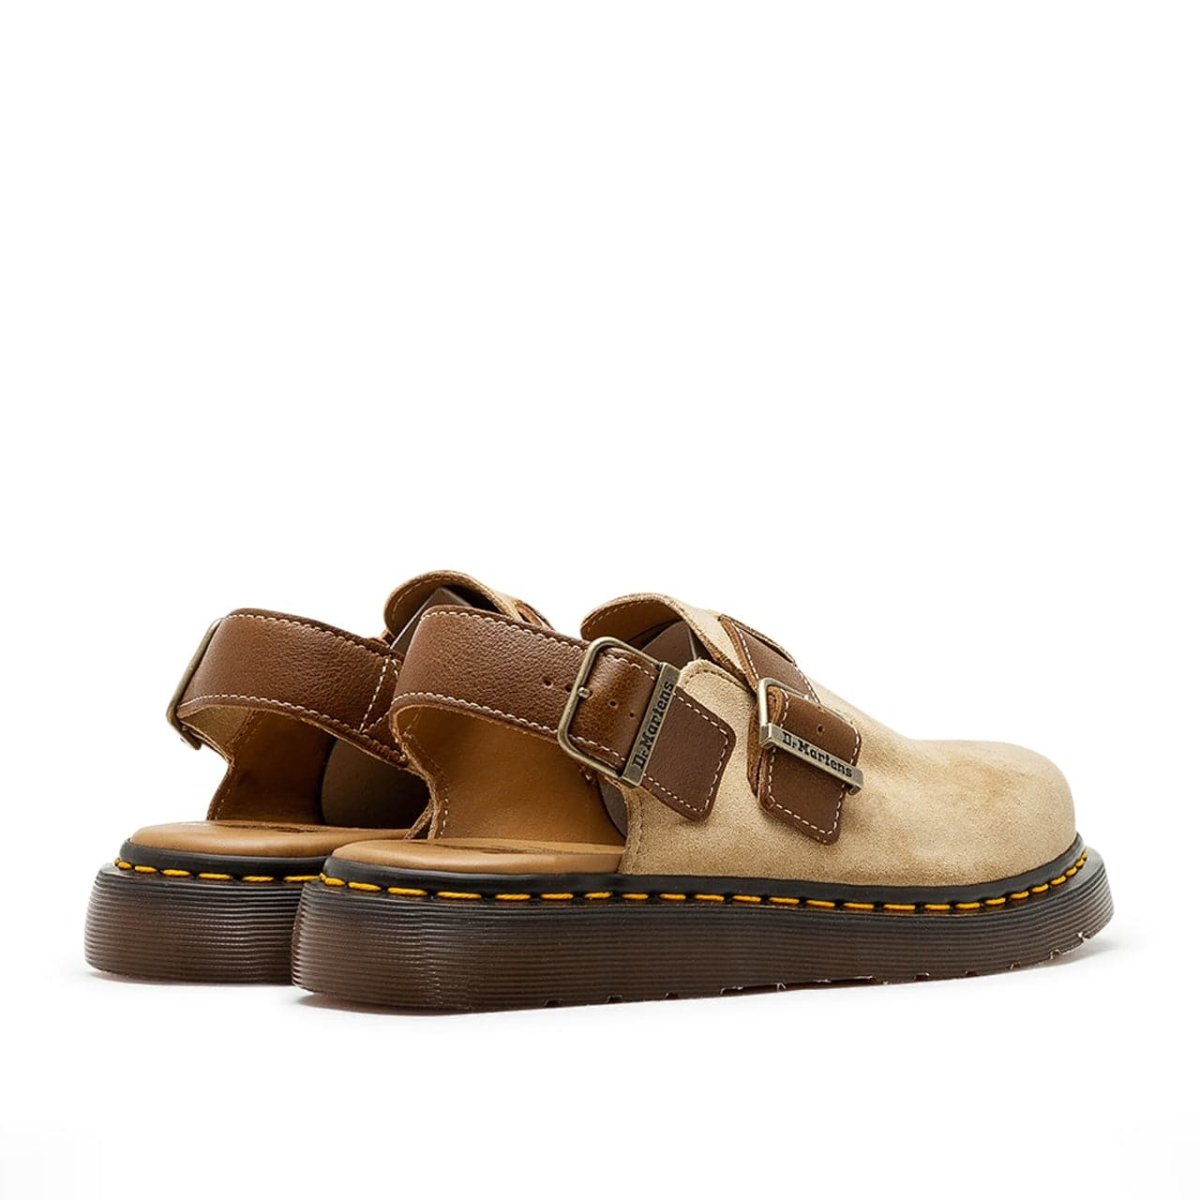 Dr. Martens Jorge Made in England Suede Mules (Braun / Gum)  - Allike Store